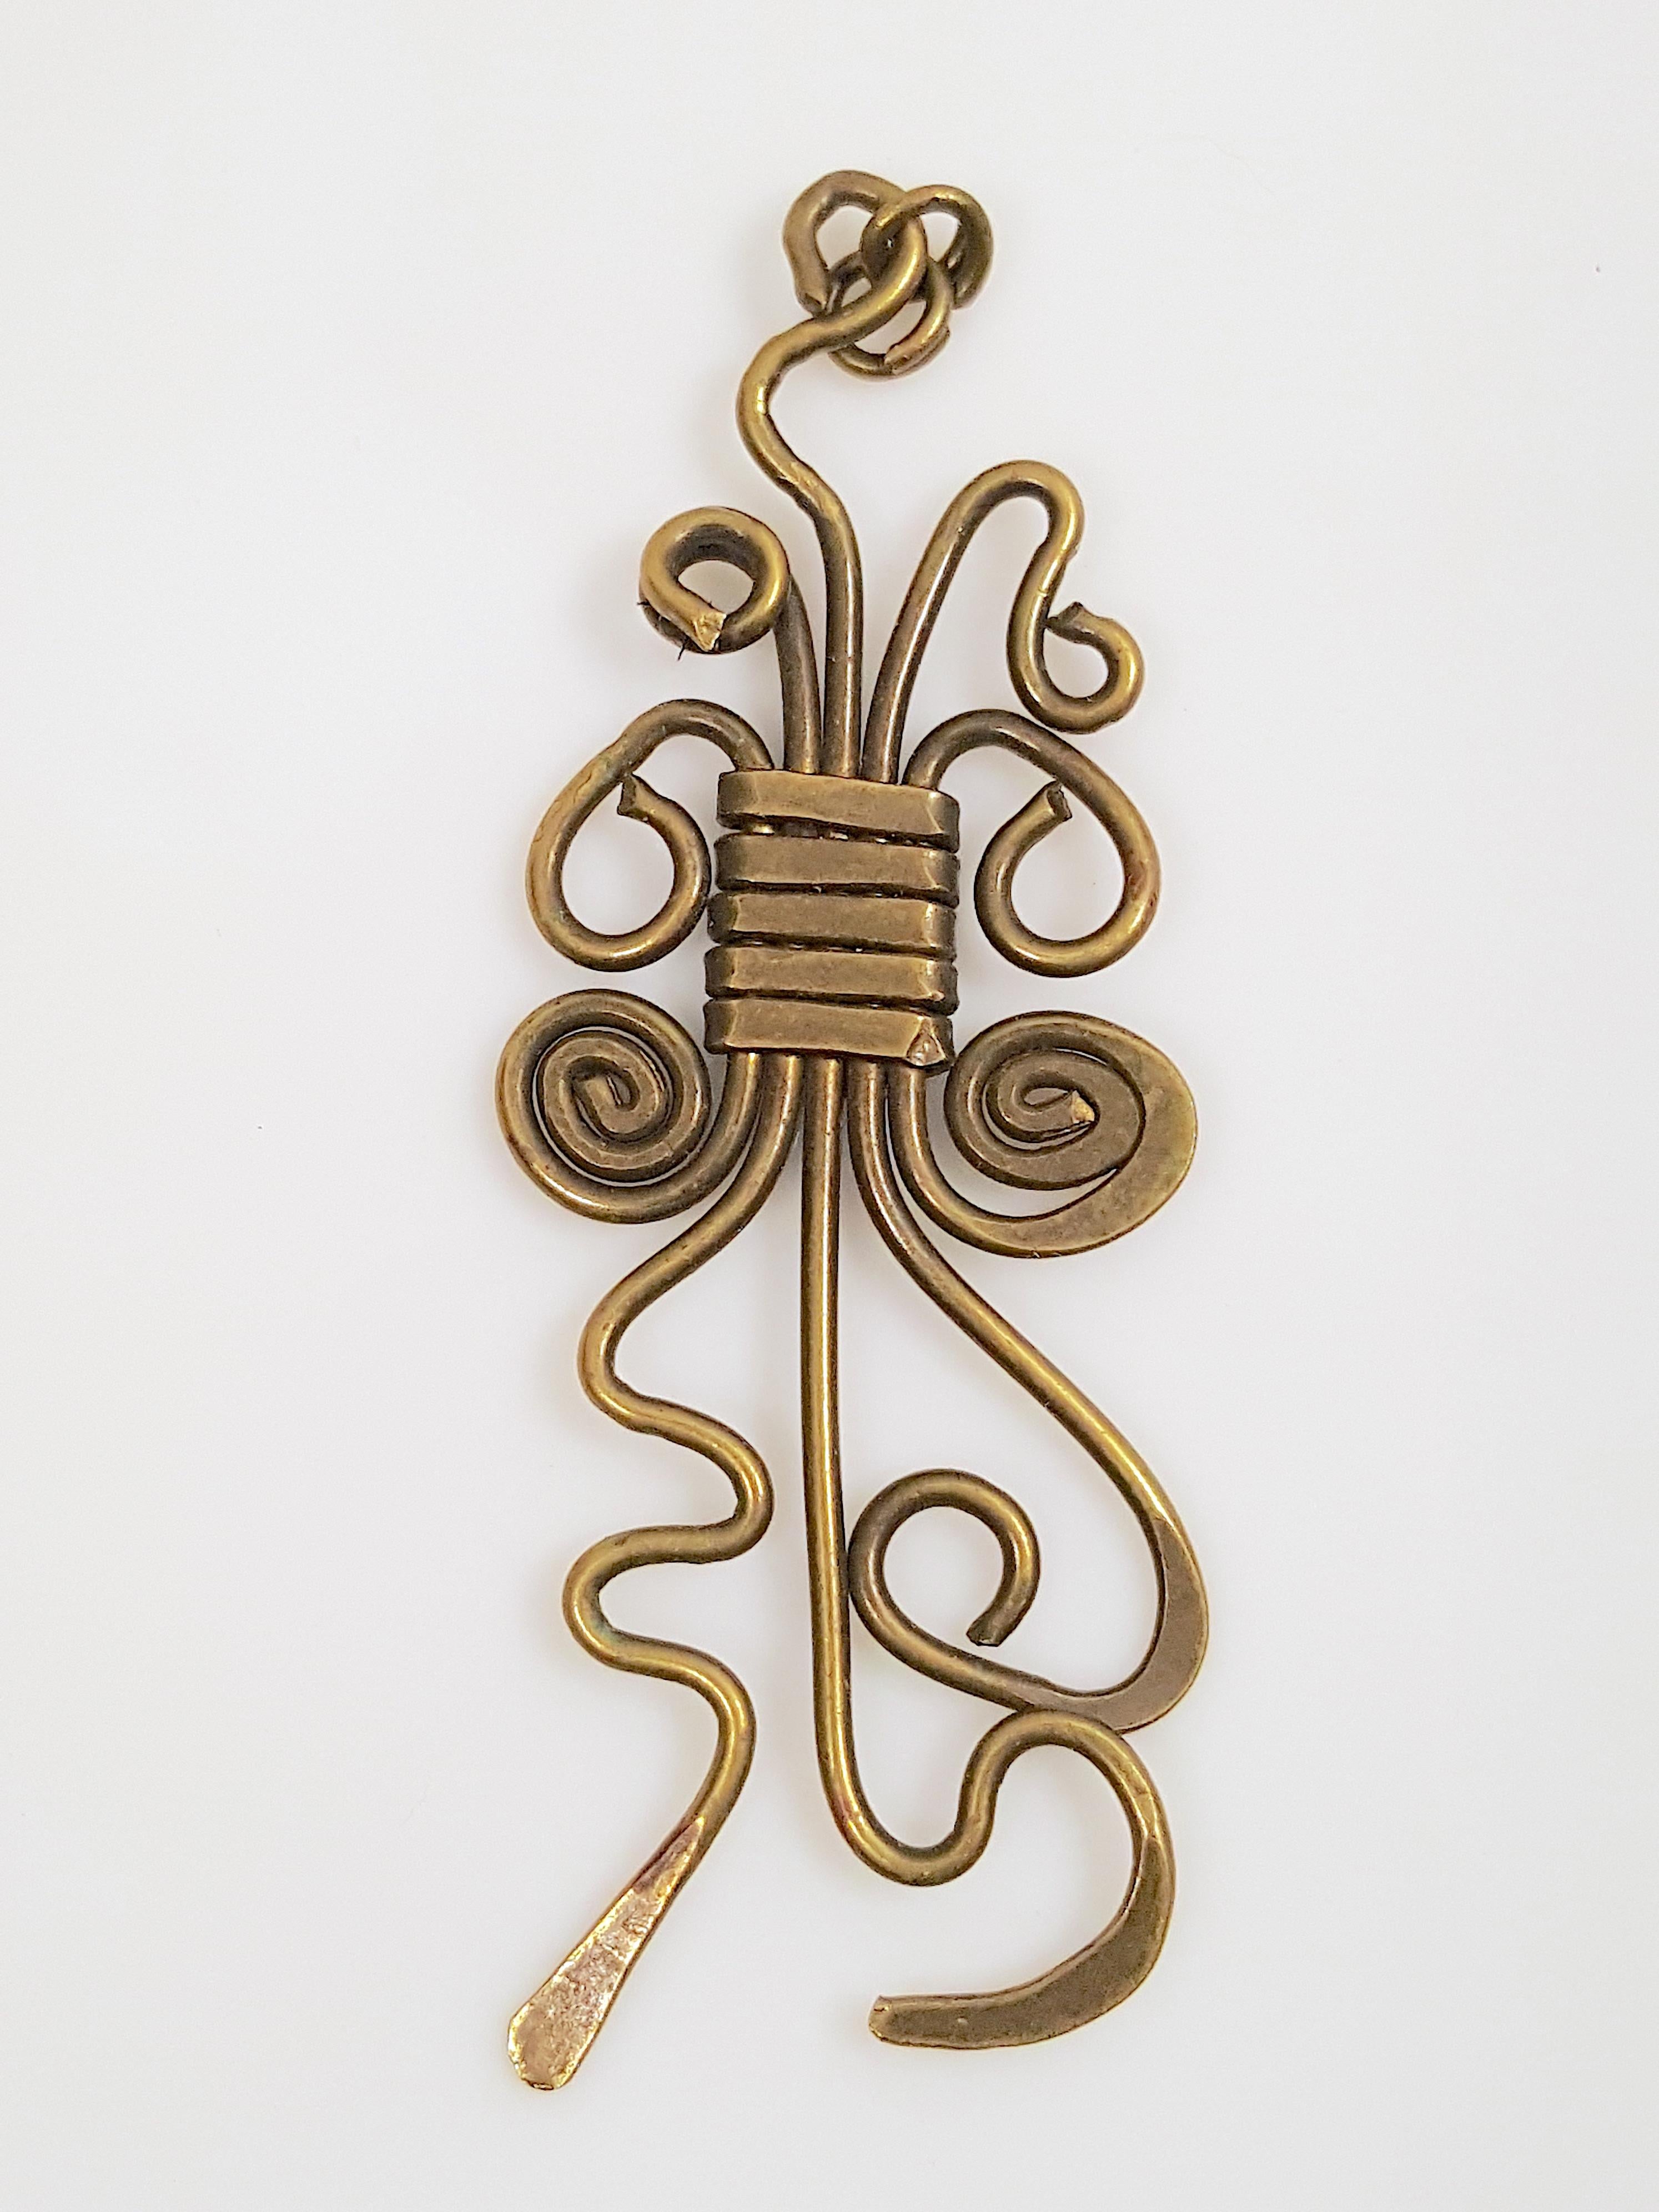 This vintage handcrafted brass-wire pendant was shaped and hammered into lively three-dimensional spirals, loops and squiggles with wrapped construction by an unknown 20th-Century studio artist judging from the lack of copyright/signature, modern